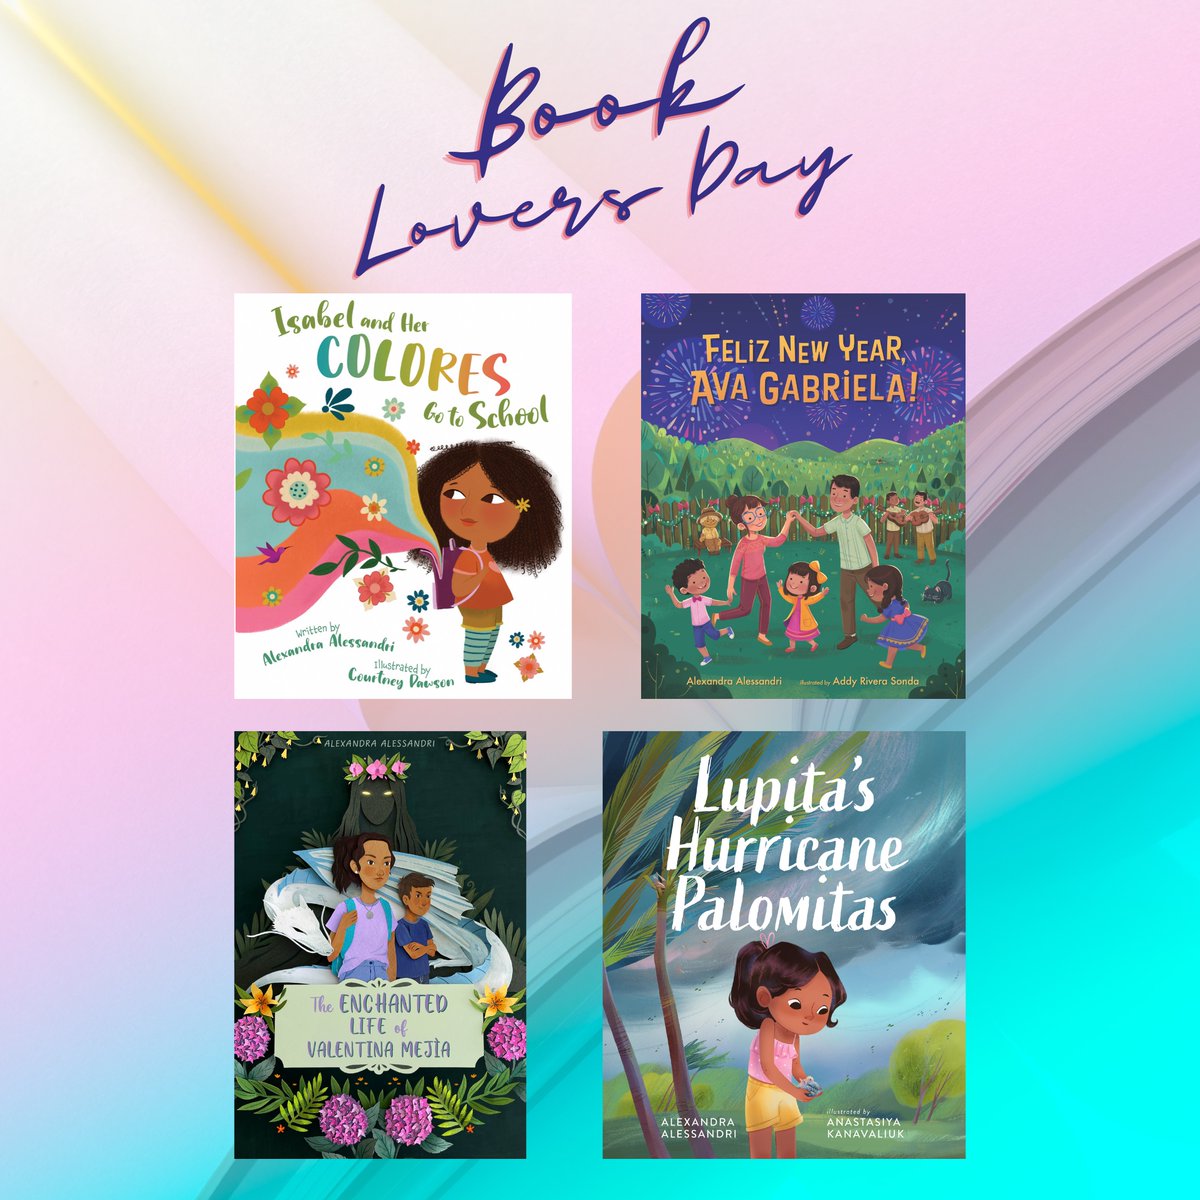 A day late but… happy #nationalbookloversday! 📚❤️

#latinxauthor #kidlit #picturebooks #MGlit  #colombian #hispanicheritagemonth #teachers #librarians  #mediaspecialists